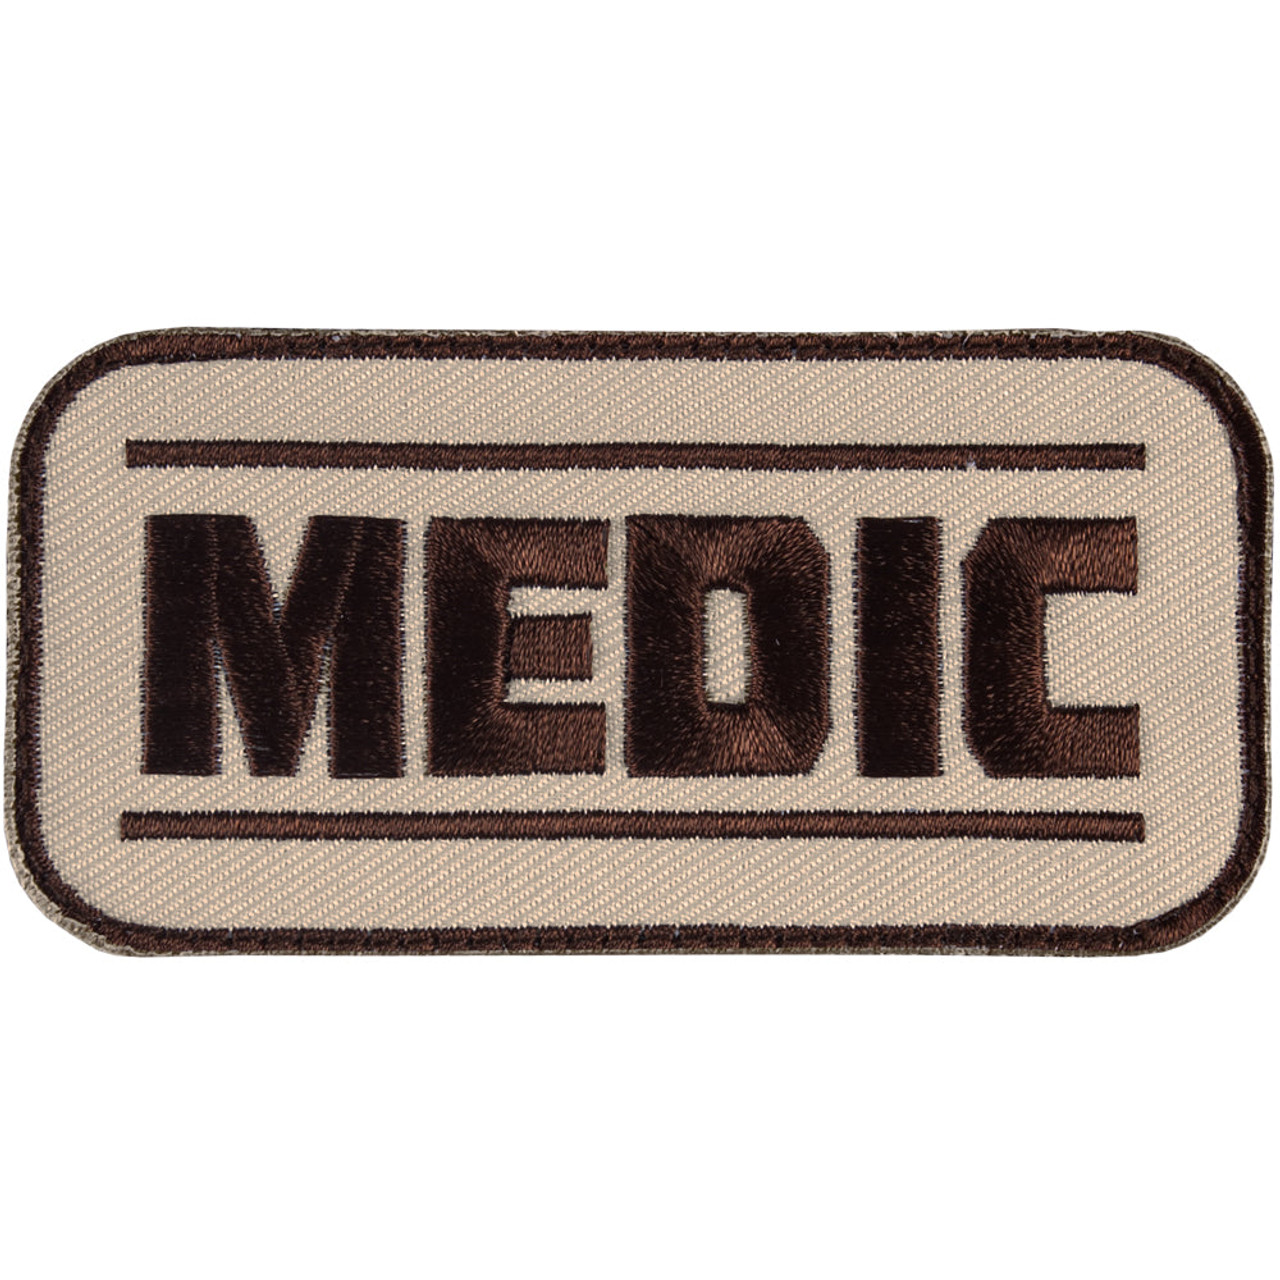 Medic Patch - Thunderhead Outfitters